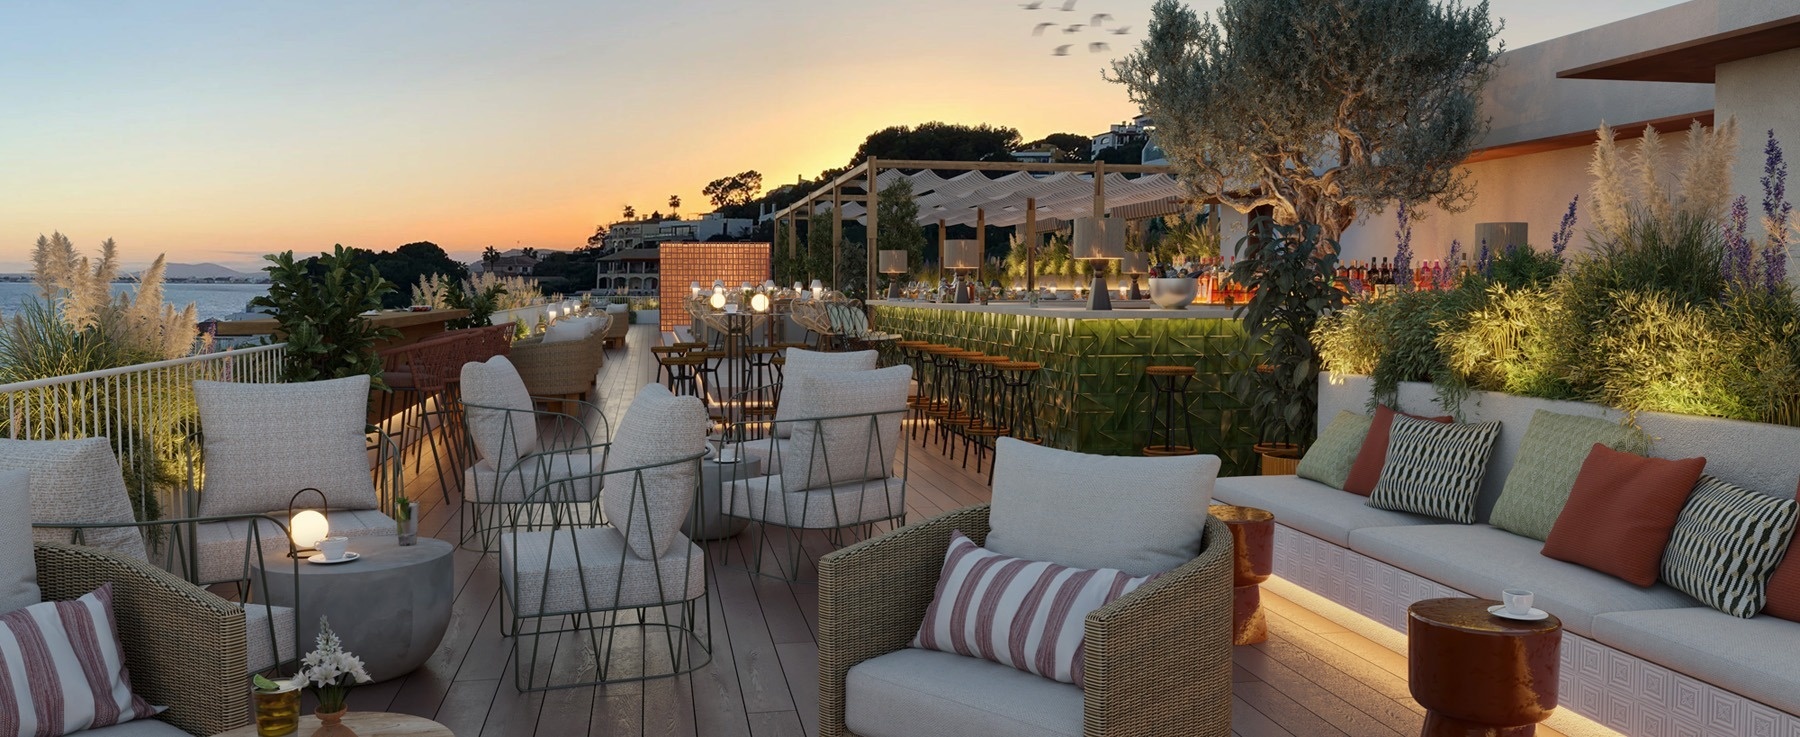 an artist 's impression of a rooftop bar at sunset